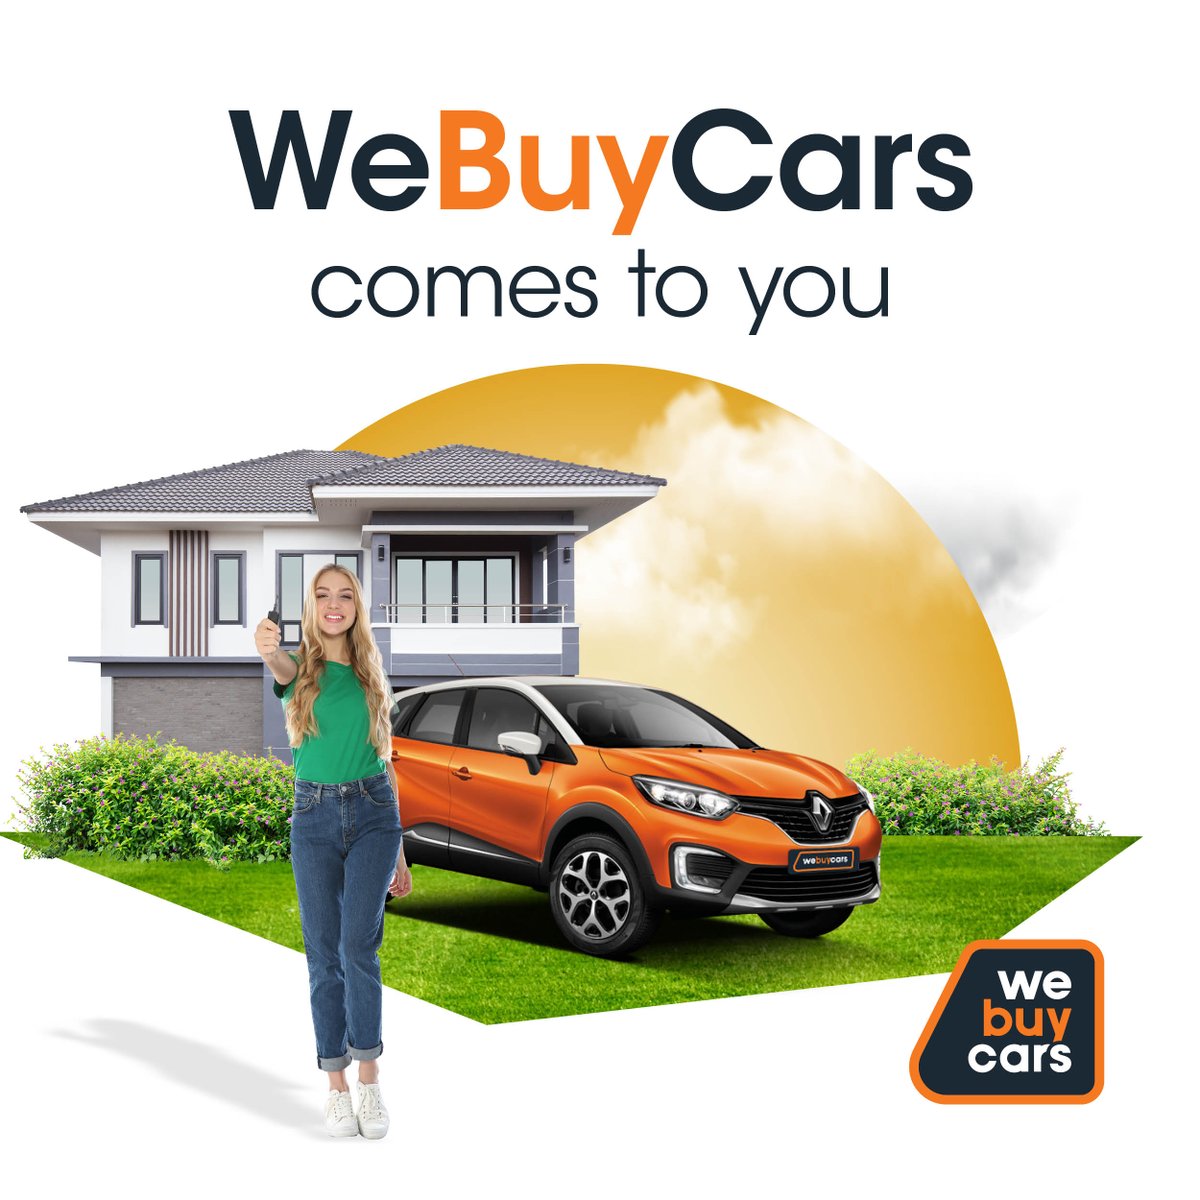 Selling your car? #WeBuyCars comes to you. Anywhere, anytime! 💸